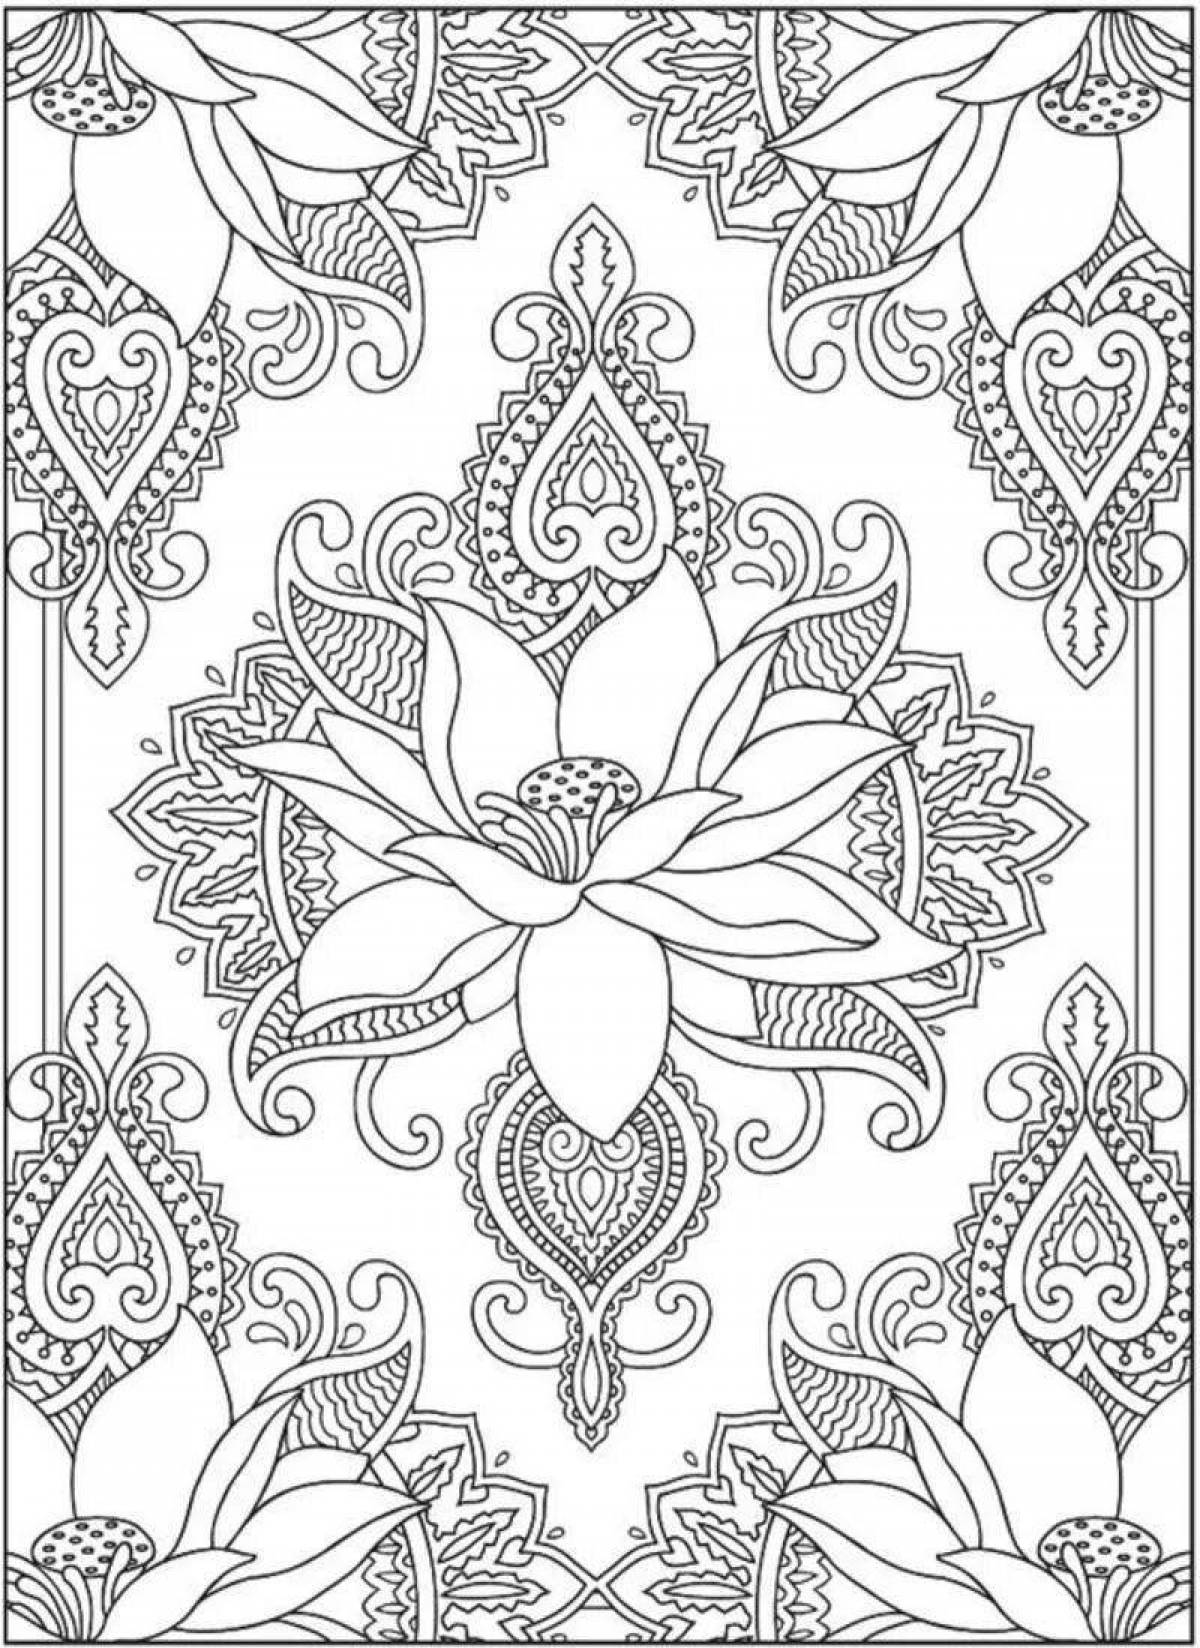 Amazing adult coloring book